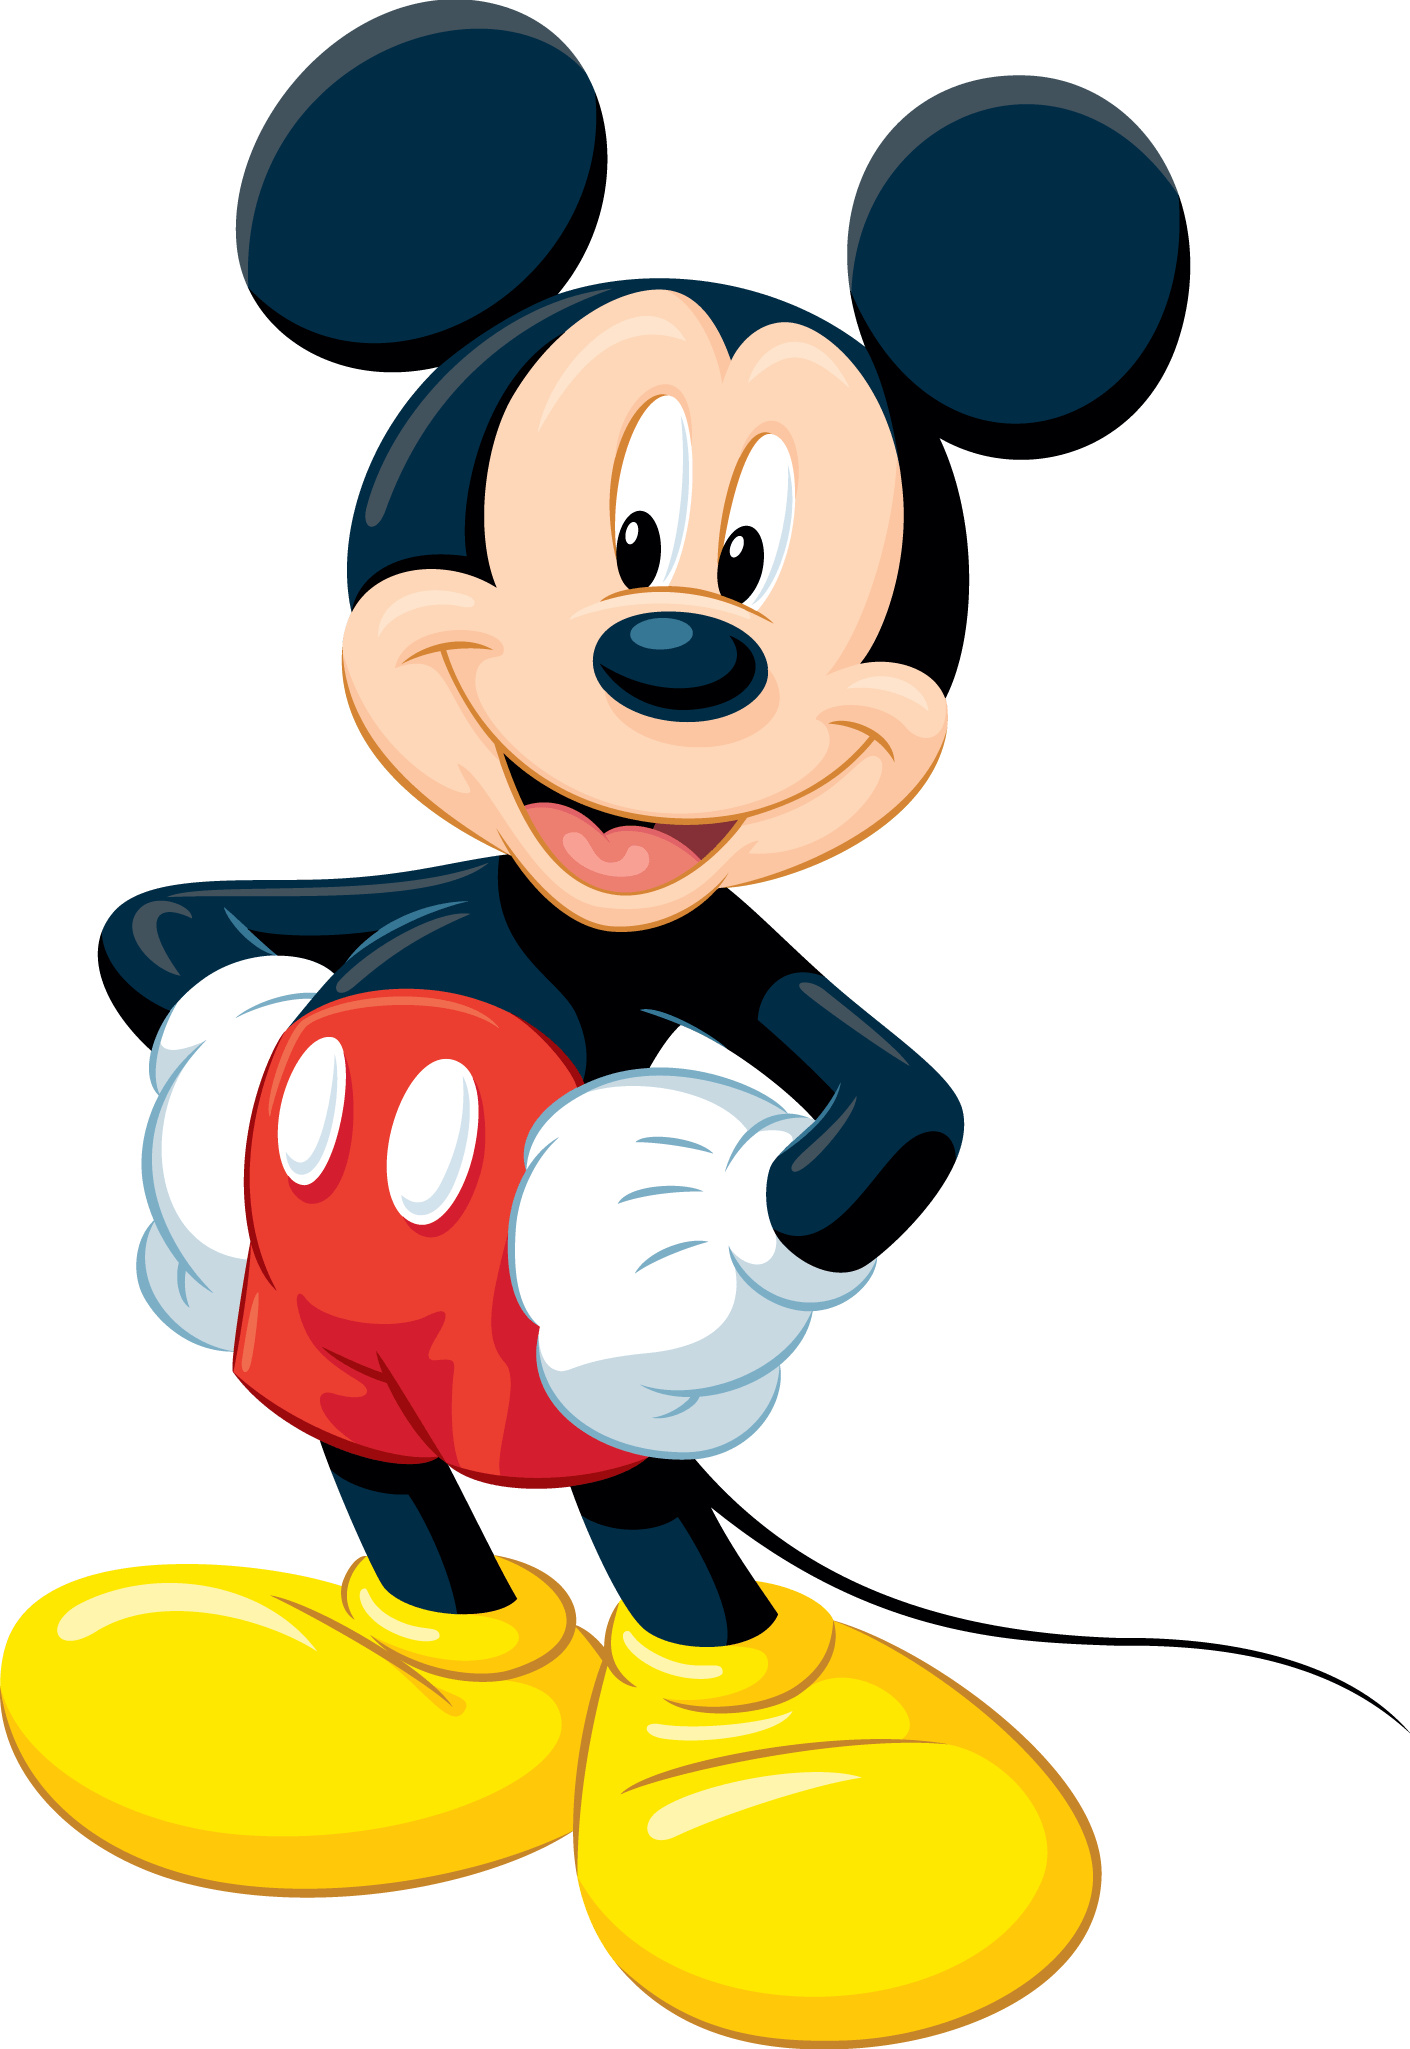 Mickey Mouse wallpapers for iPad, High-resolution options, Stylish designs, 1410x2050 HD Handy